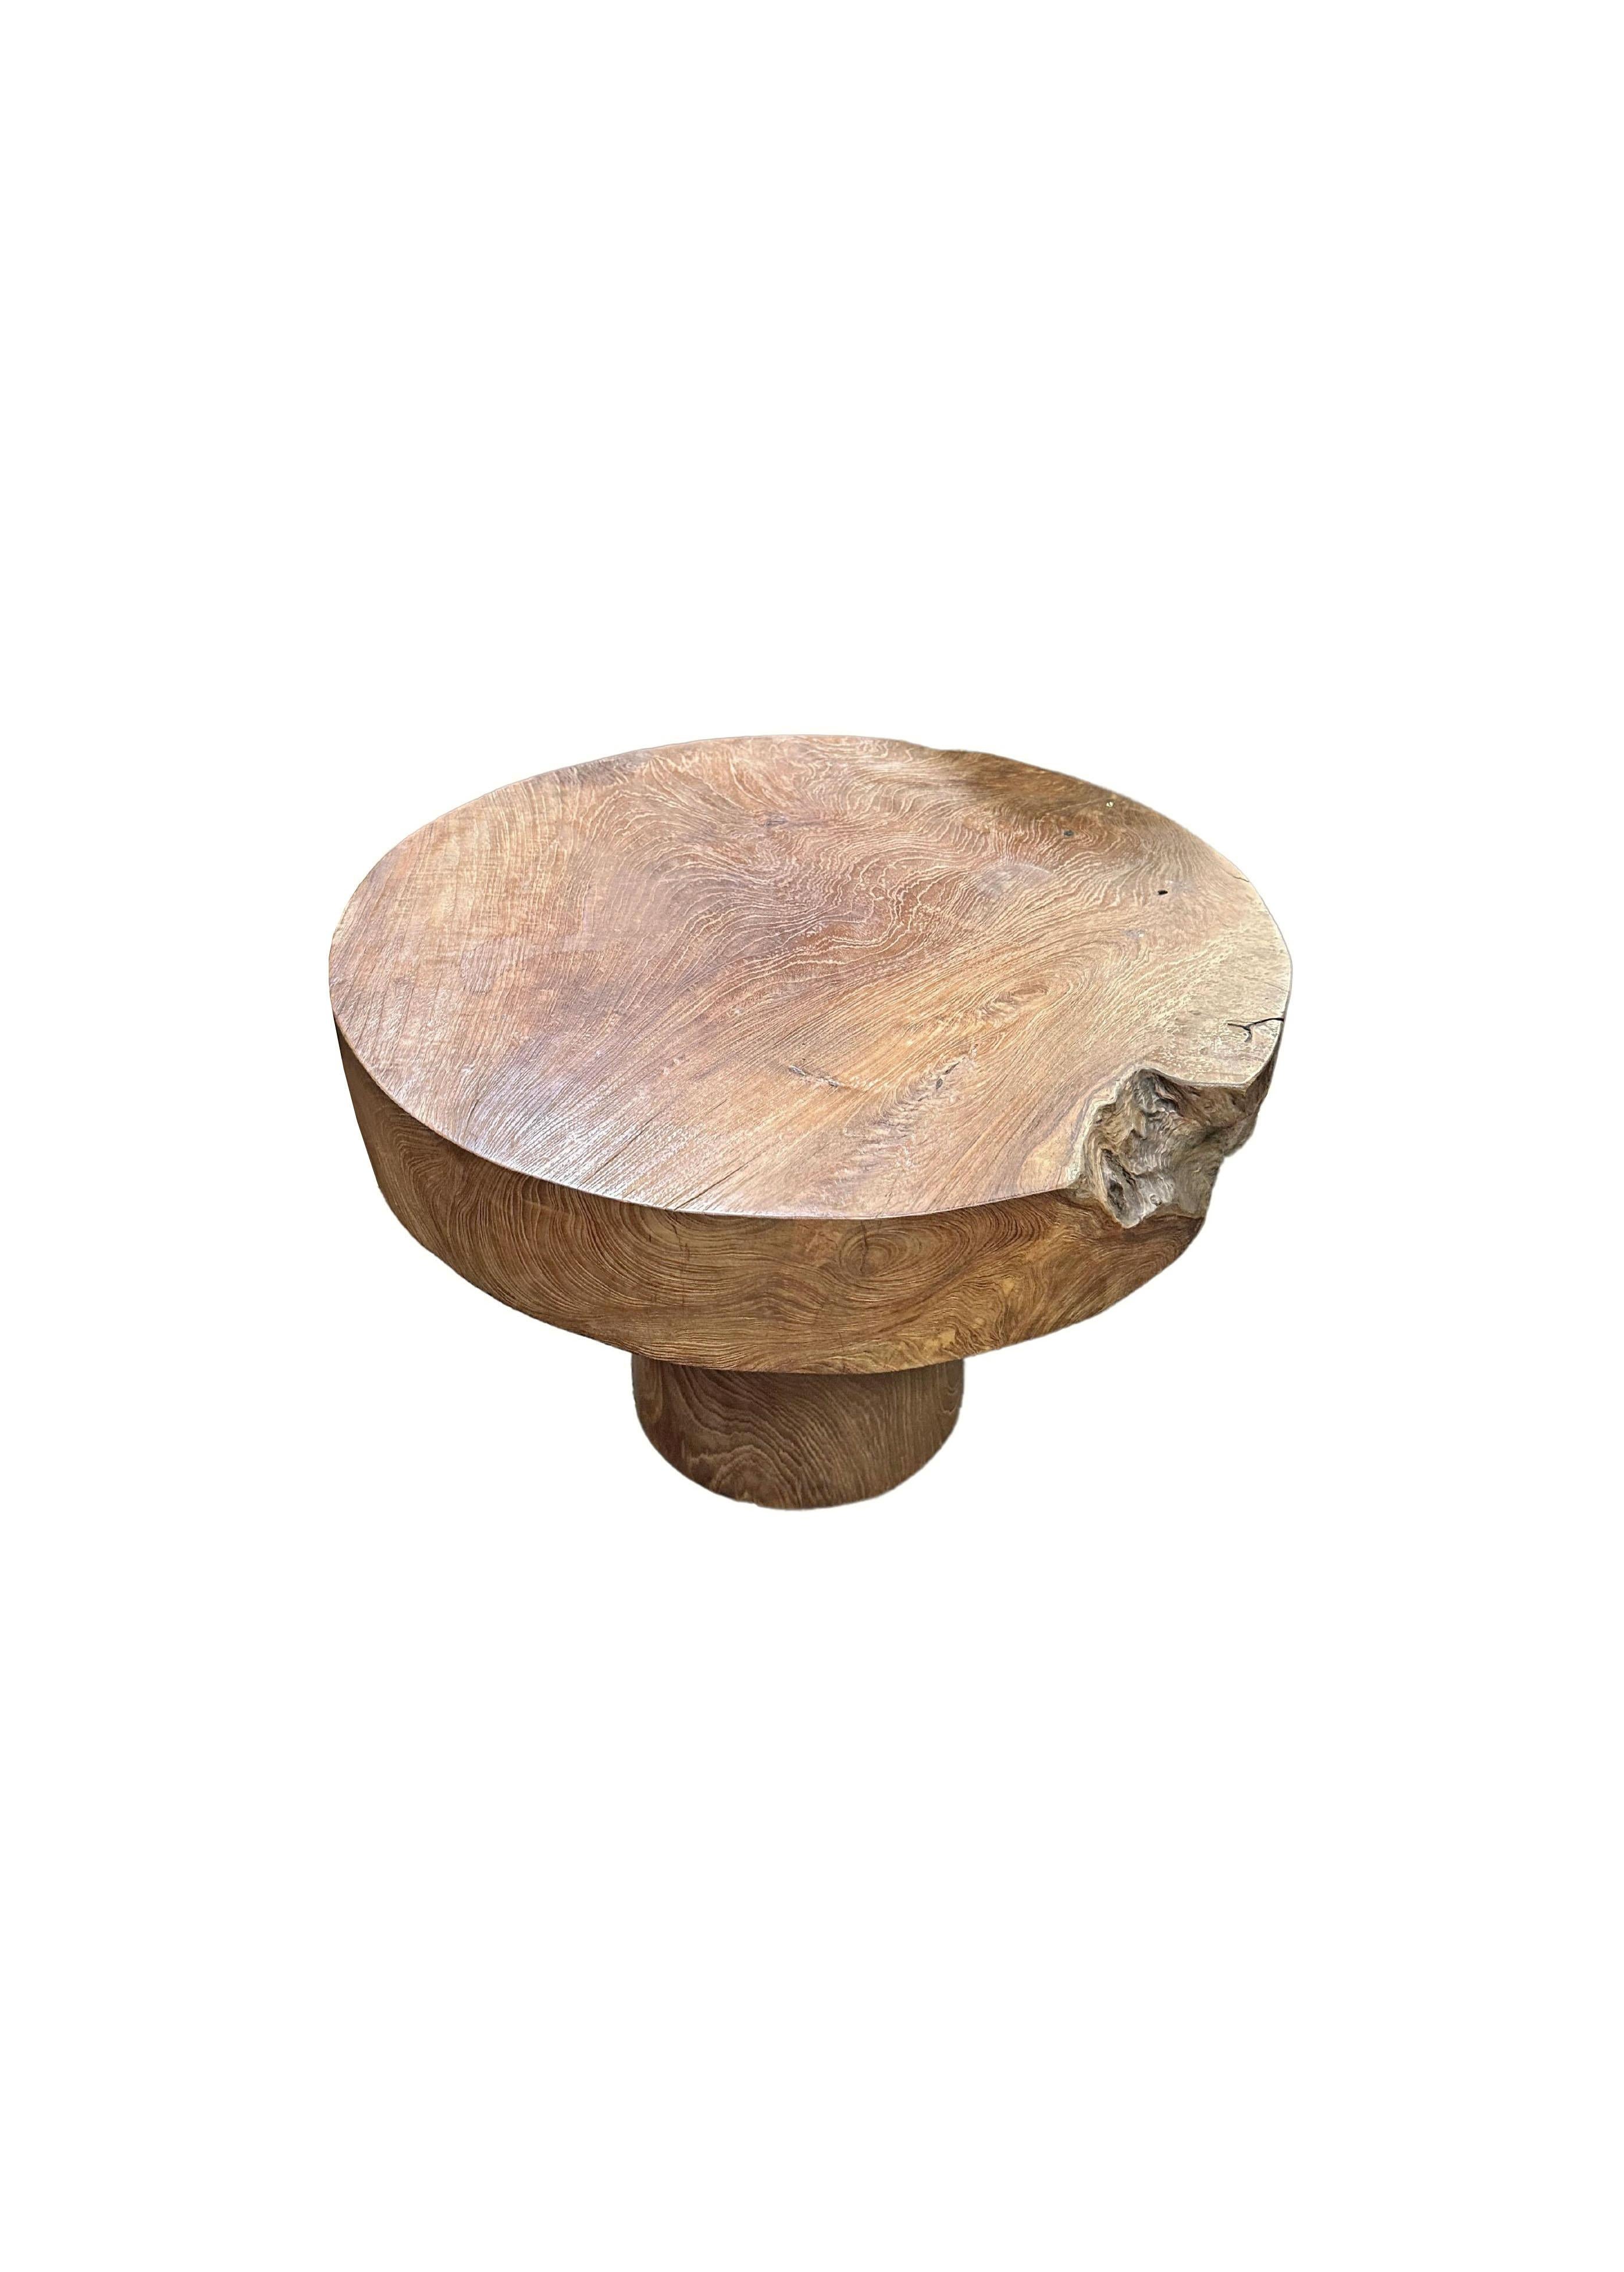 Hand-Crafted Sculptural Round Table Crafted from Teak Wood, Natural Finish For Sale